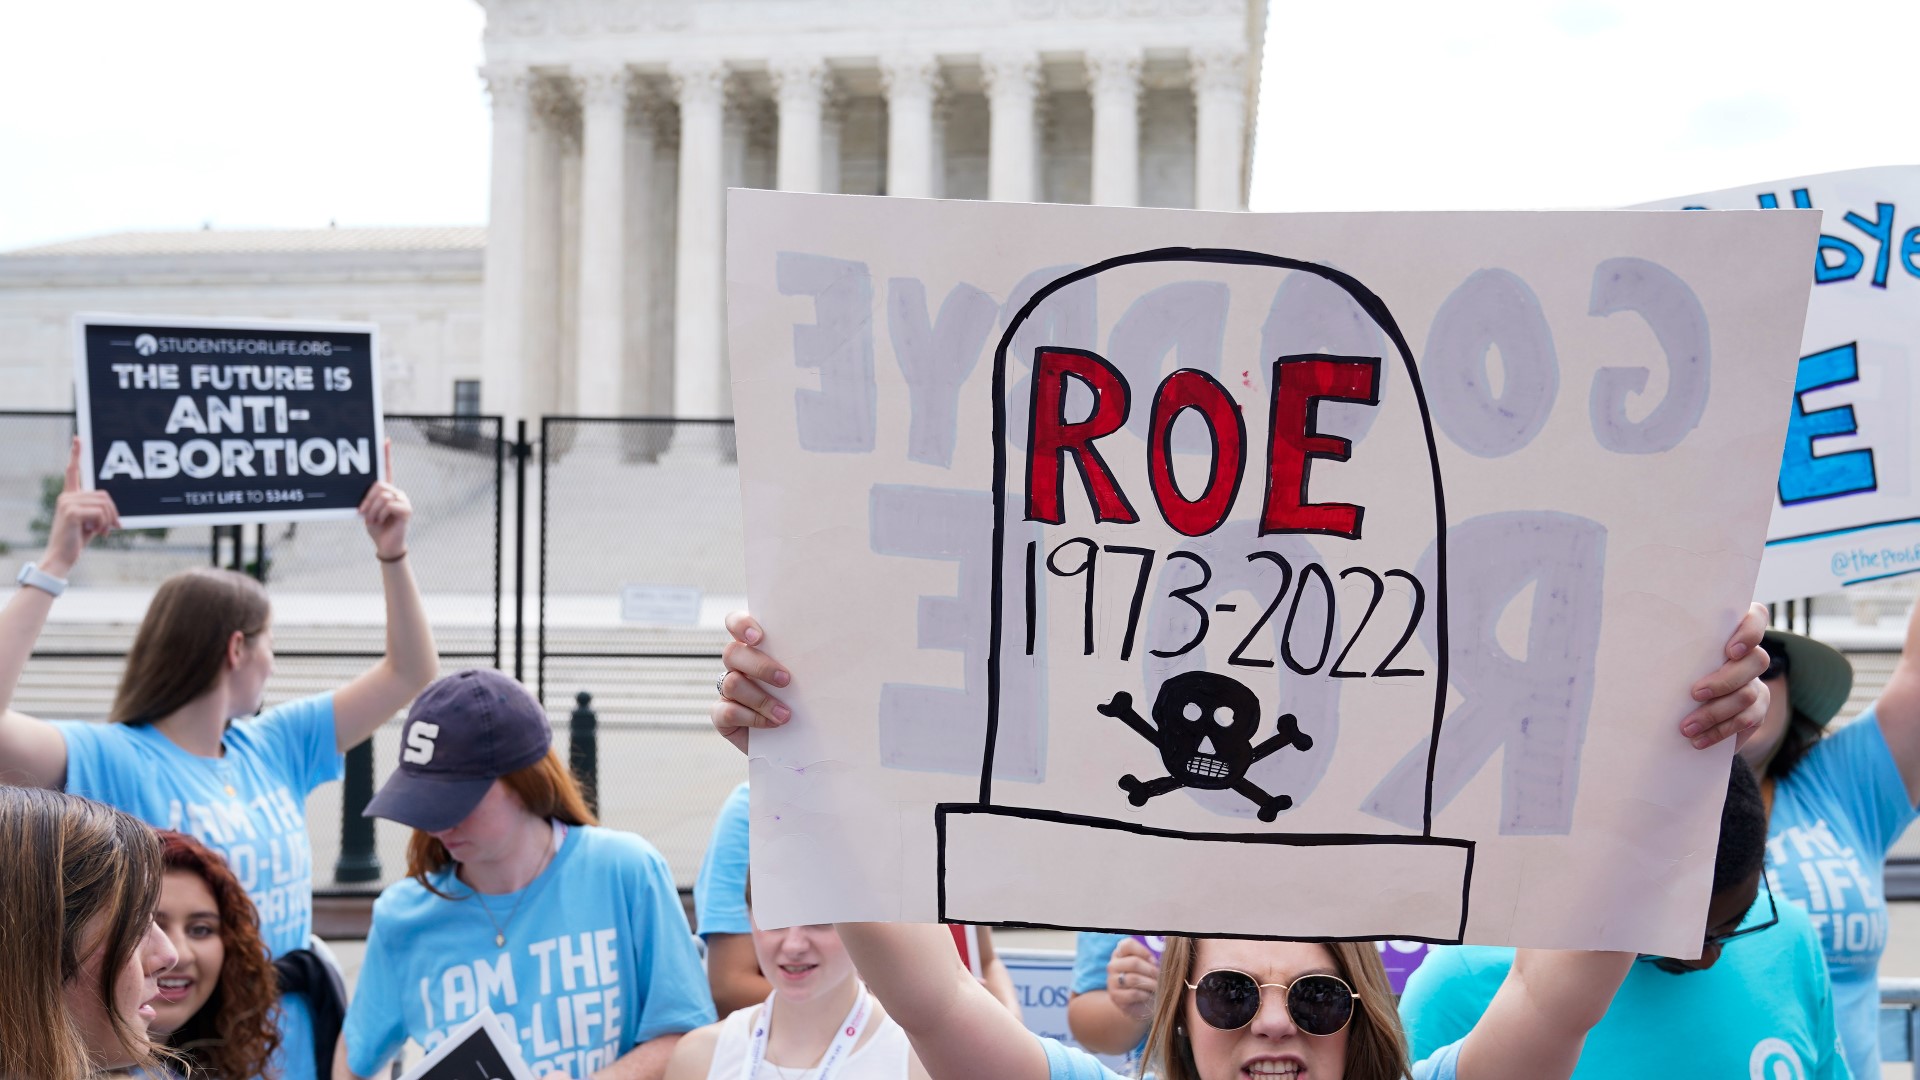 The Supreme Court has ended constitutional protections for abortion that had been in place for nearly 50 years in a decision by its conservative majority to overturn